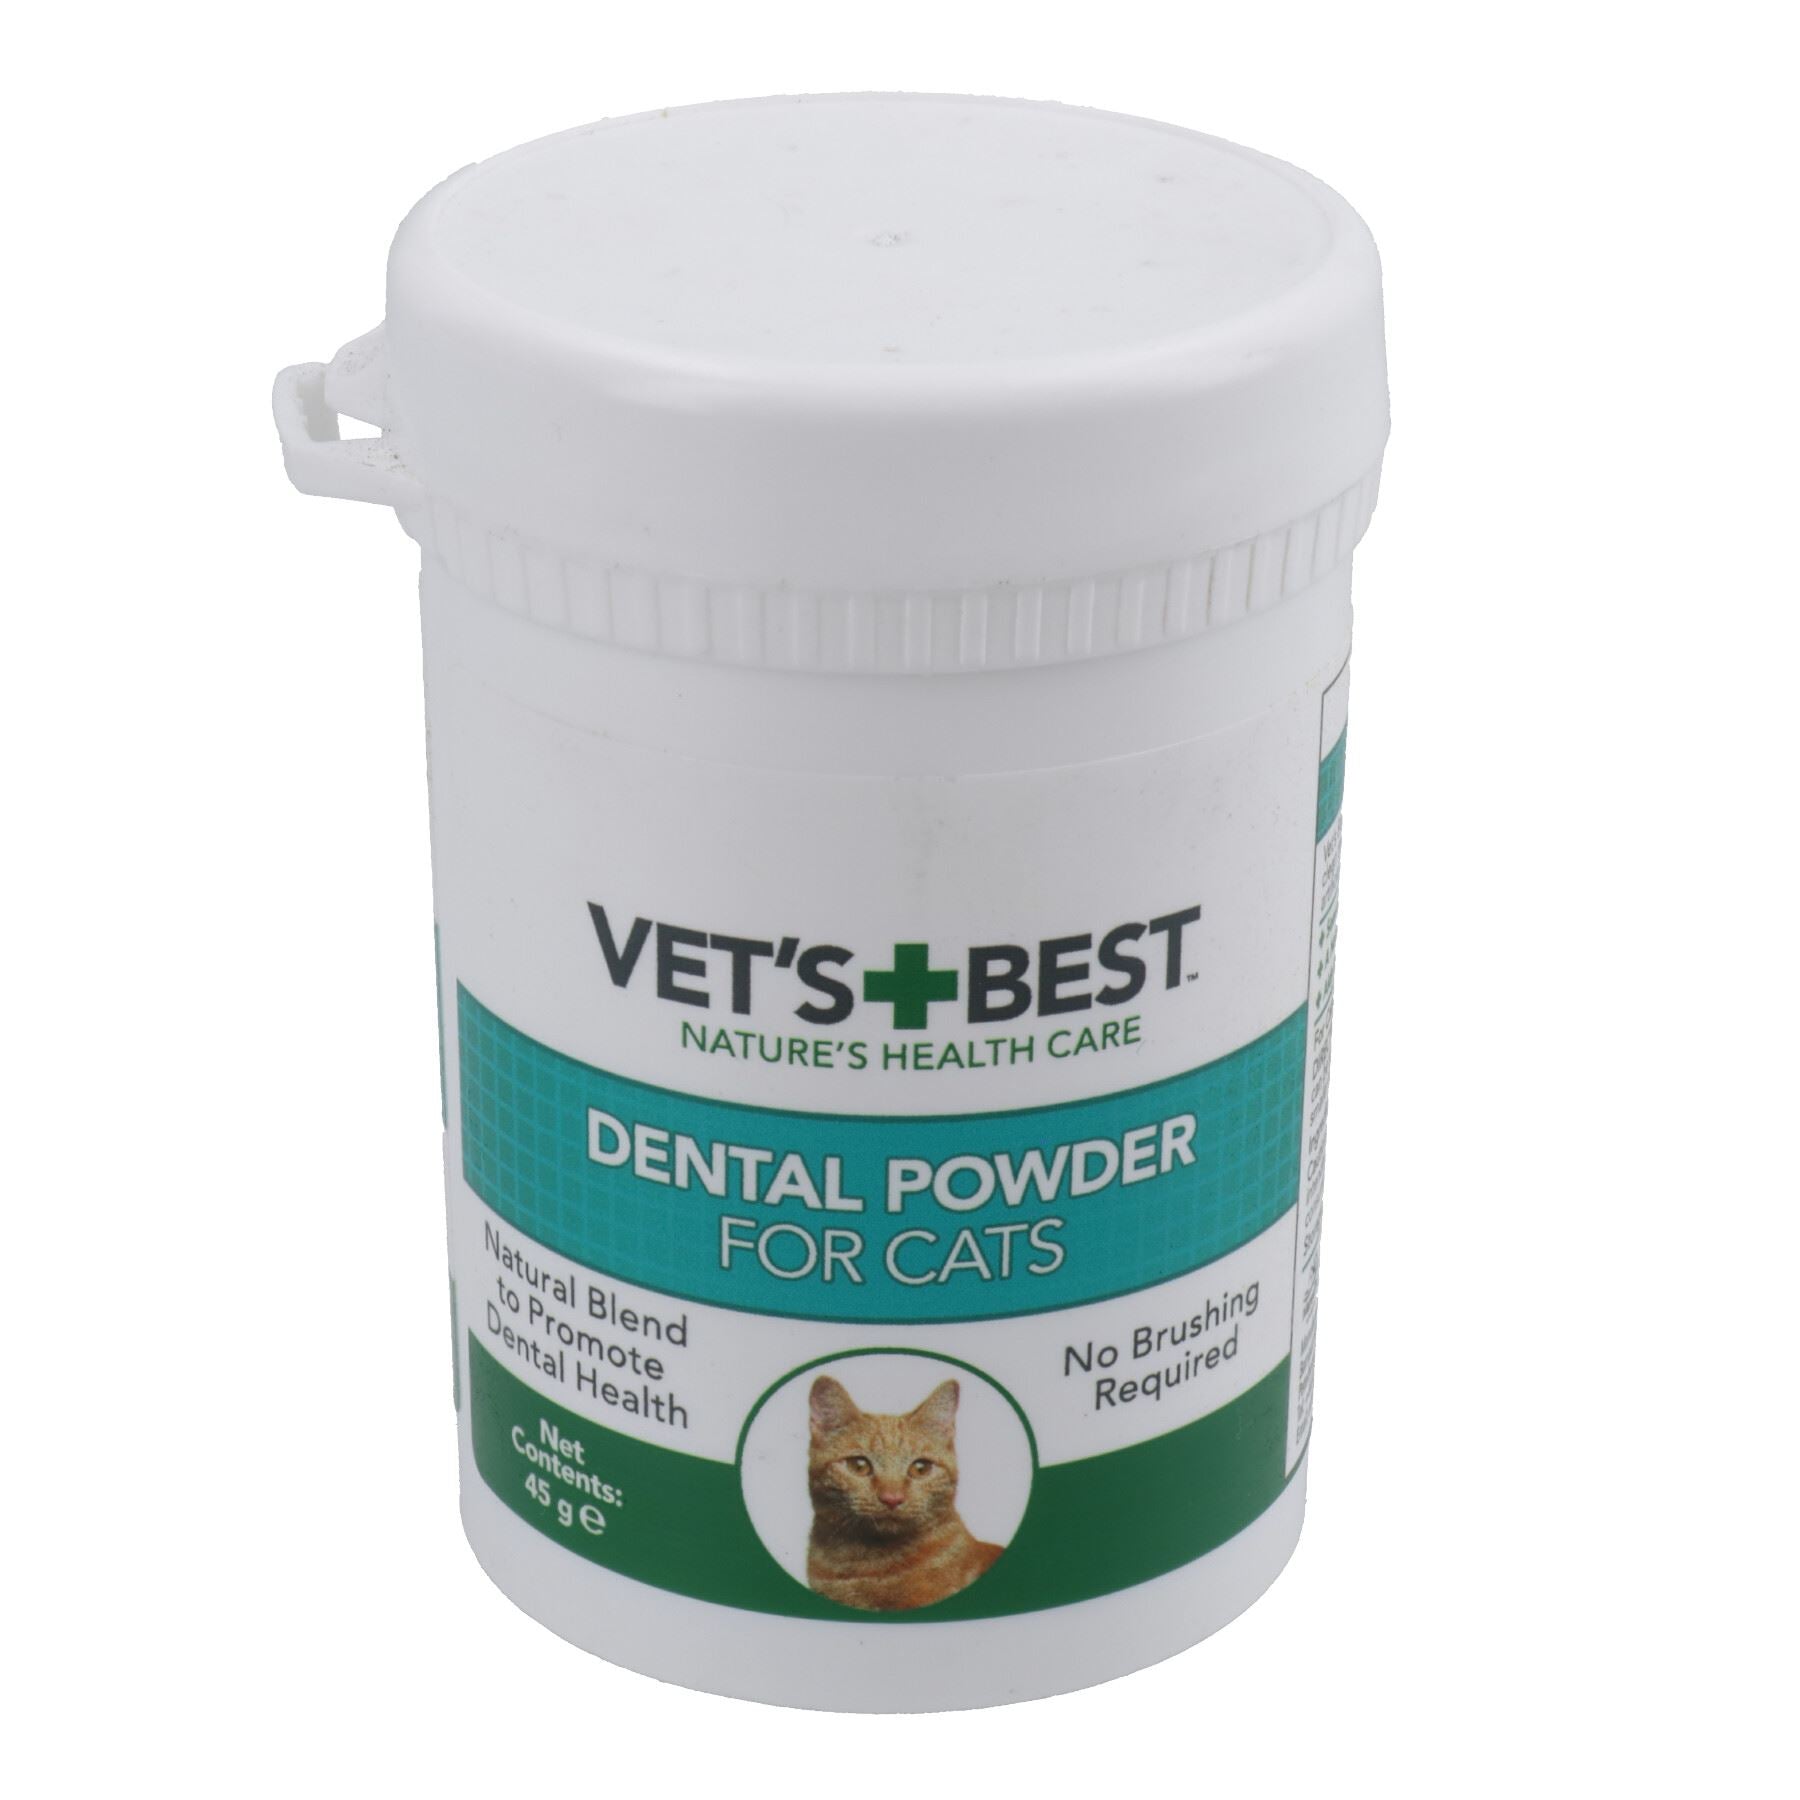 1 Tub 45g of Cat's Natural Dental Powder To Promote Dental Health With Scoop